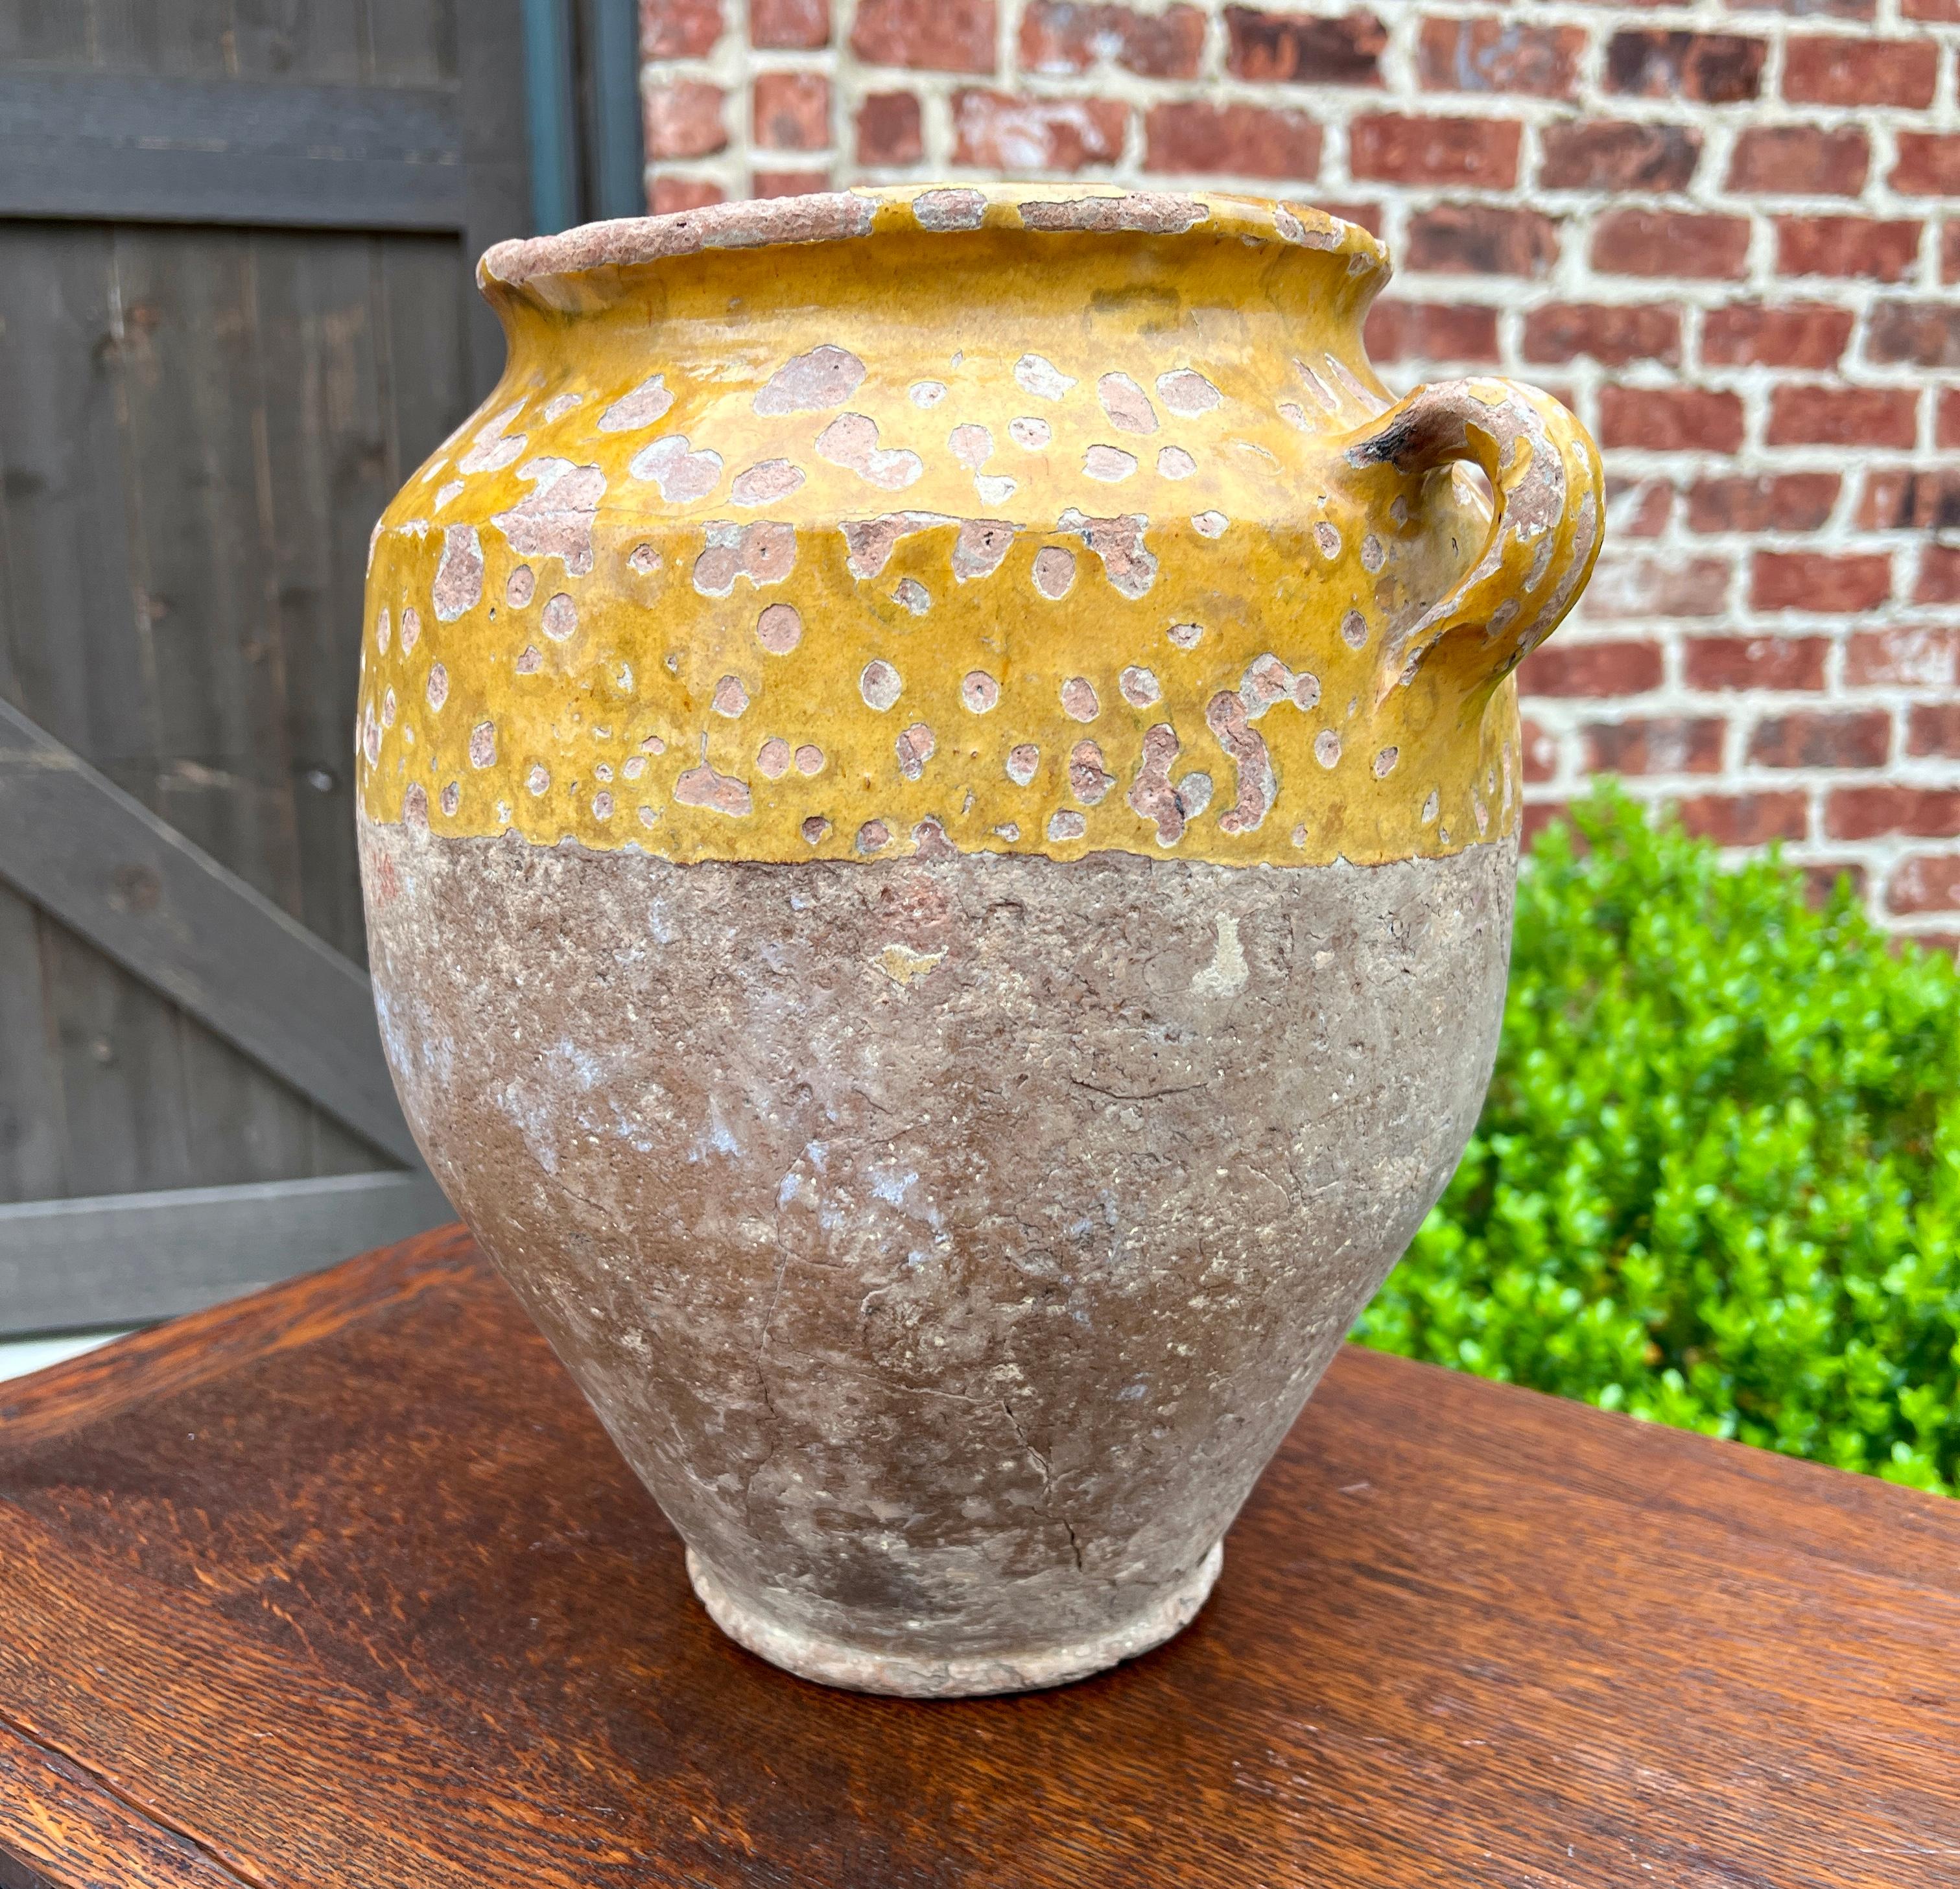 Ceramic Antique French Country Confit Pot Pottery Jar Jug Glazed Yellow Ochre Large #1 For Sale